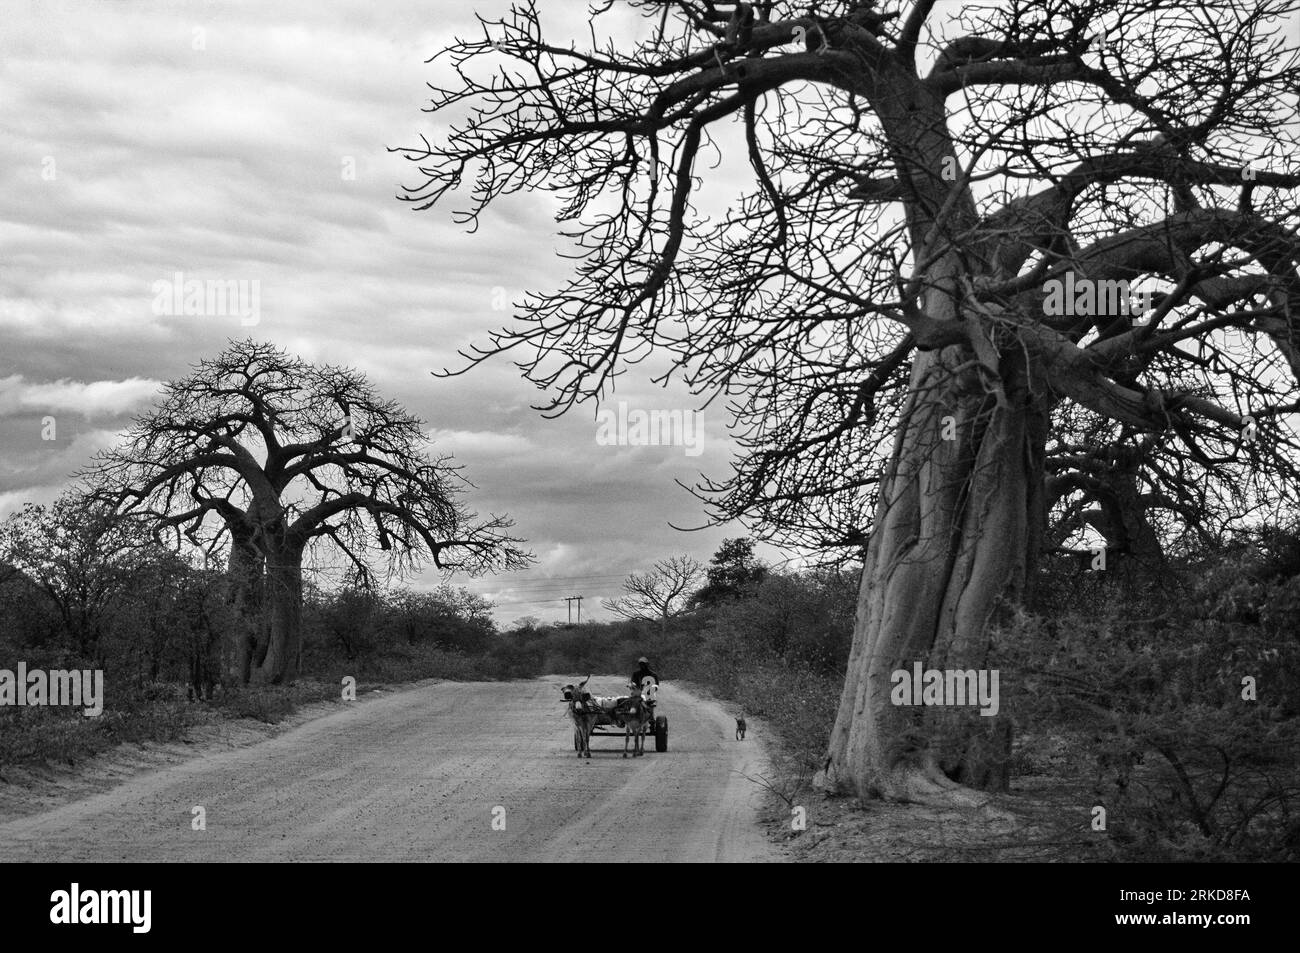 African villager travelling on donkey cart through on a country road lined by giant baobab trees in Limpopo, South Africa Stock Photo